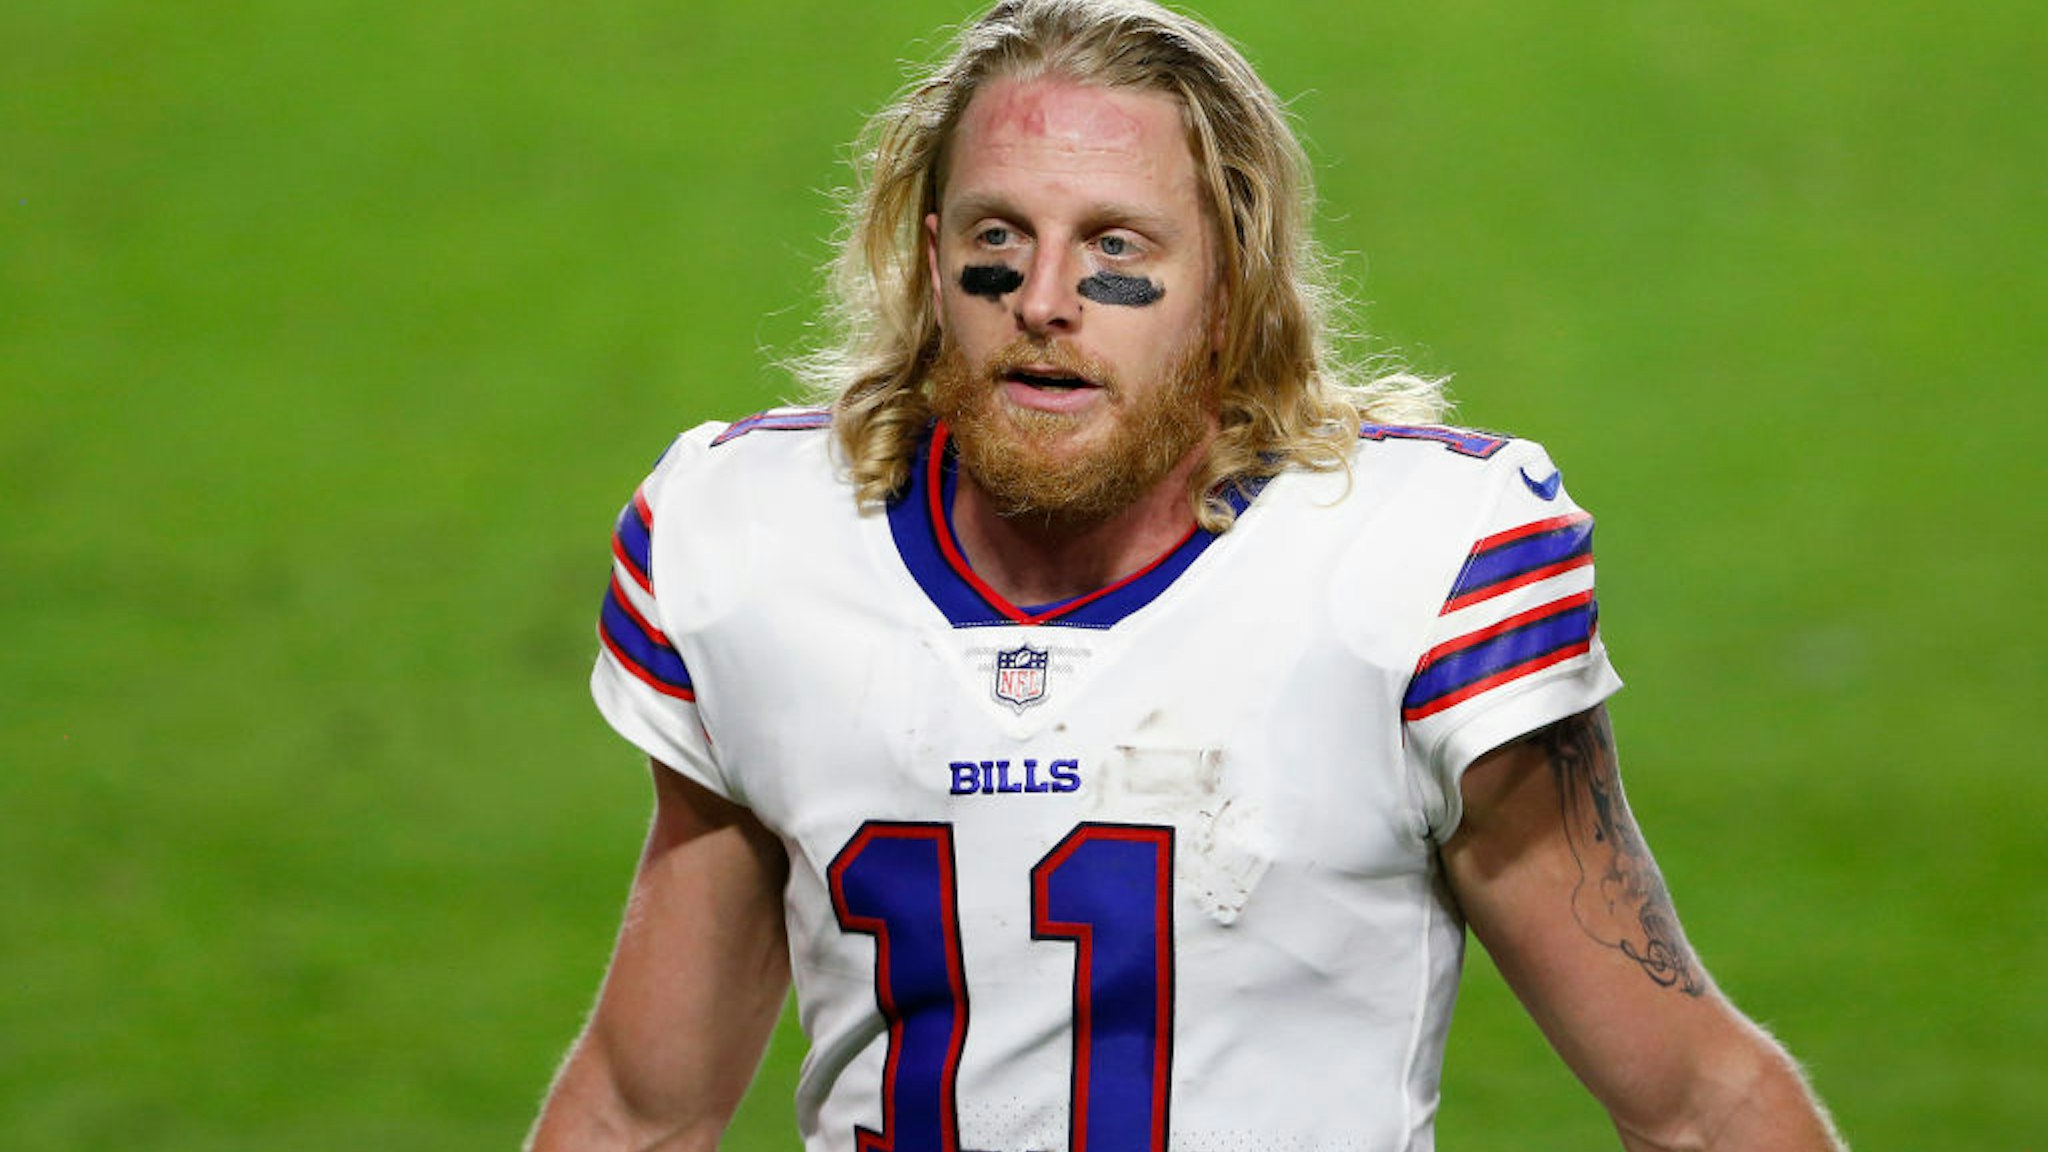 Wide receiver Cole Beasley #11 of the Buffalo Bills during the NFL football game against the San Francisco 49ers at State Farm Stadium on December 07, 2020 in Glendale, Arizona.